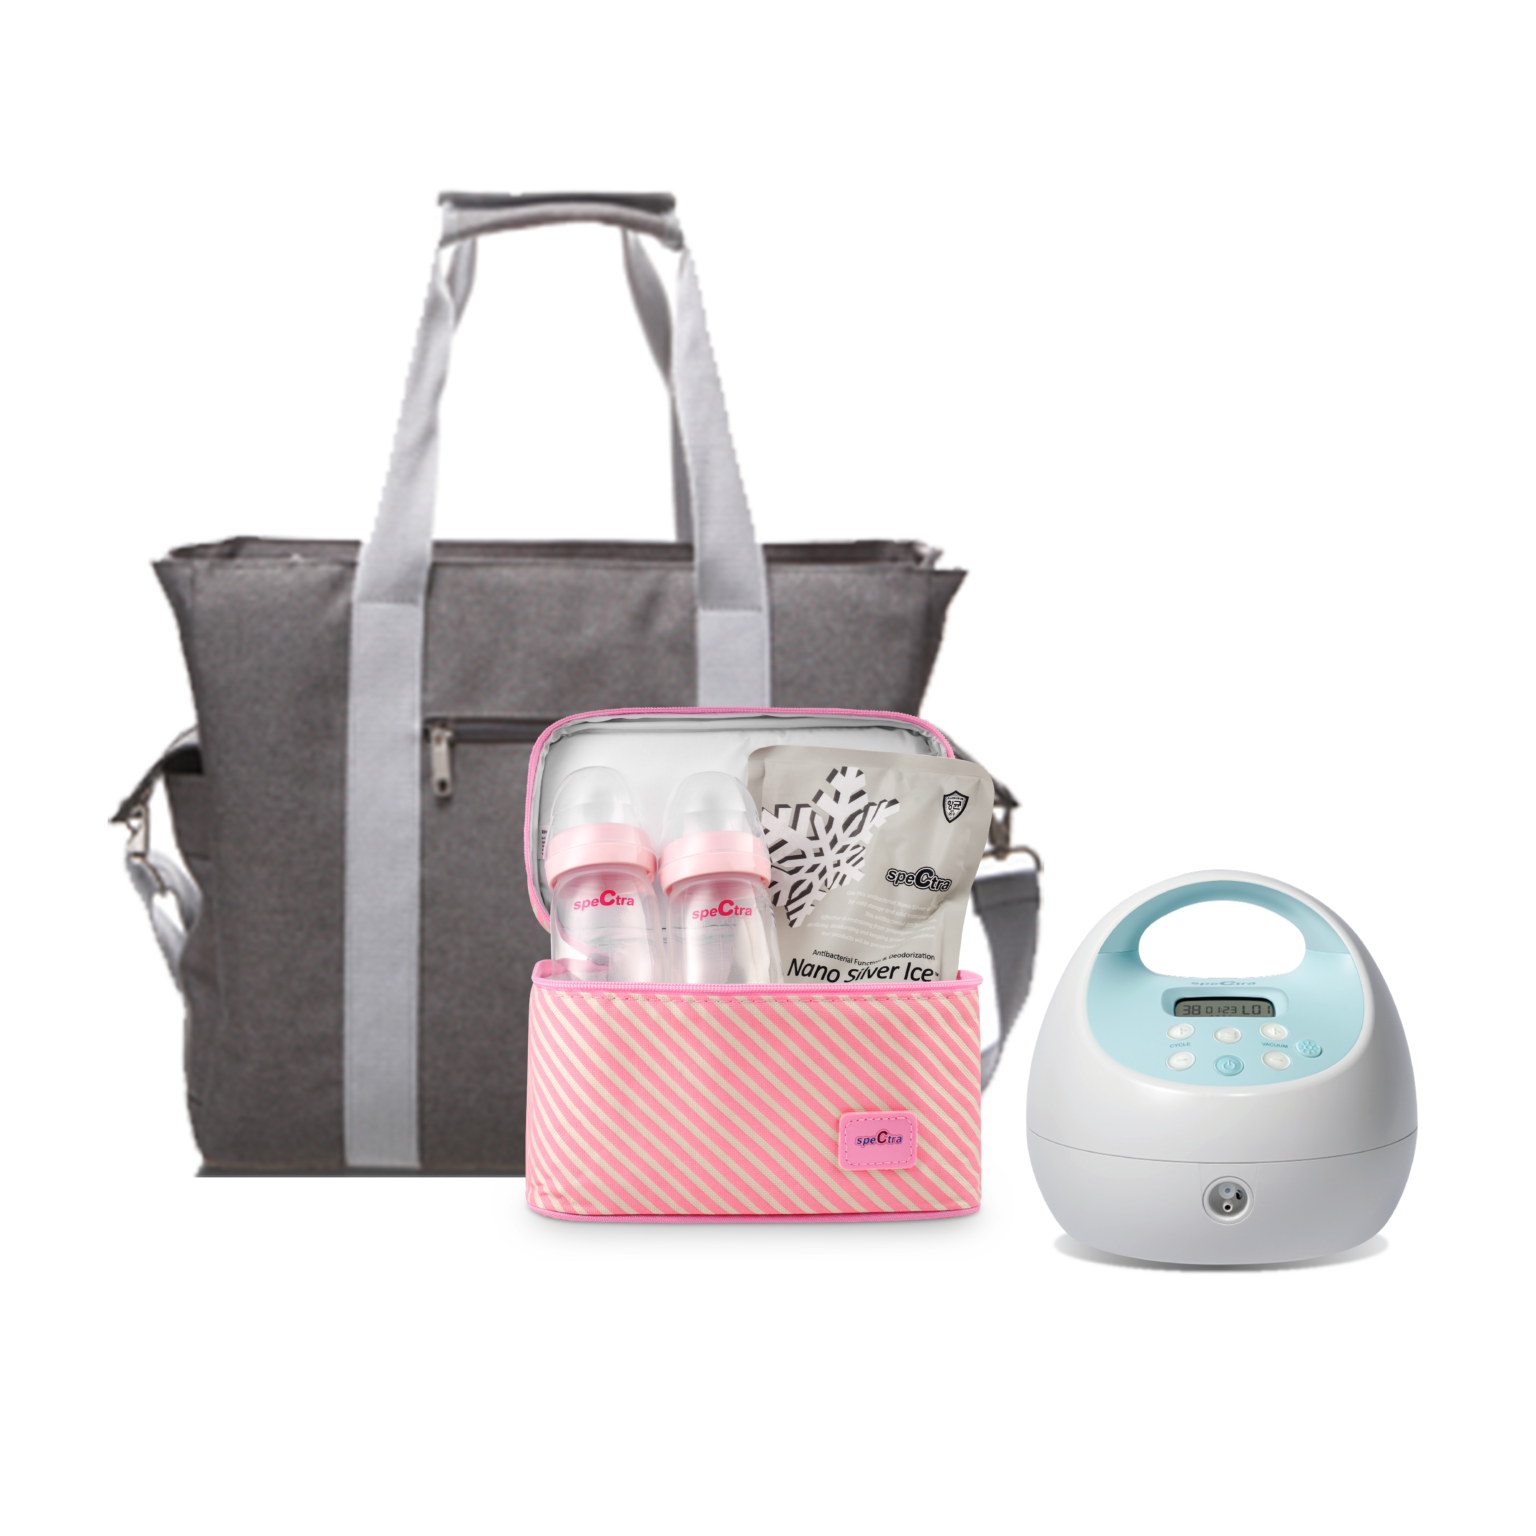 Spectra S1 Plus Portable And Rechargeable Electric Breast Pump With Tote Bottles And Cooler